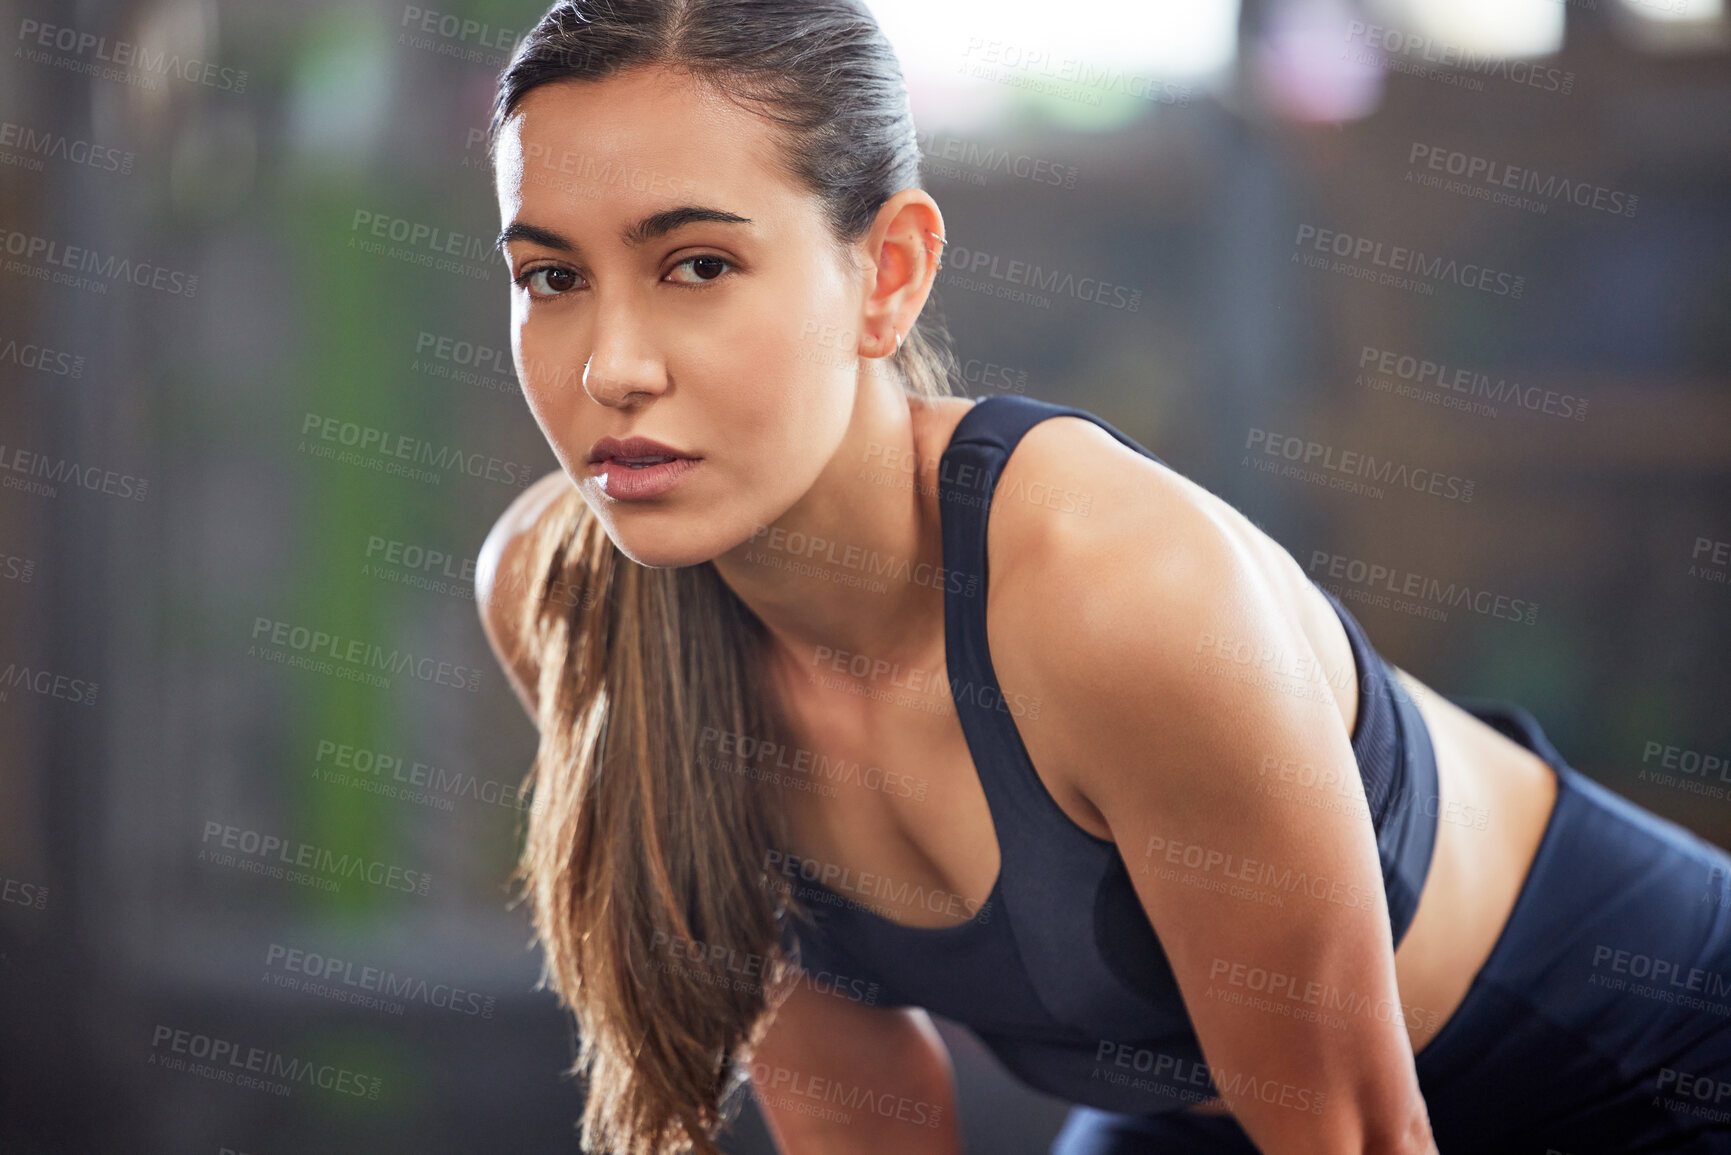 Buy stock photo Fitness, gym and athletic woman taking a break and resting after a workout. Portrait of a fit and healthy woman looking tired after exercising and being active at a health and wellness facility